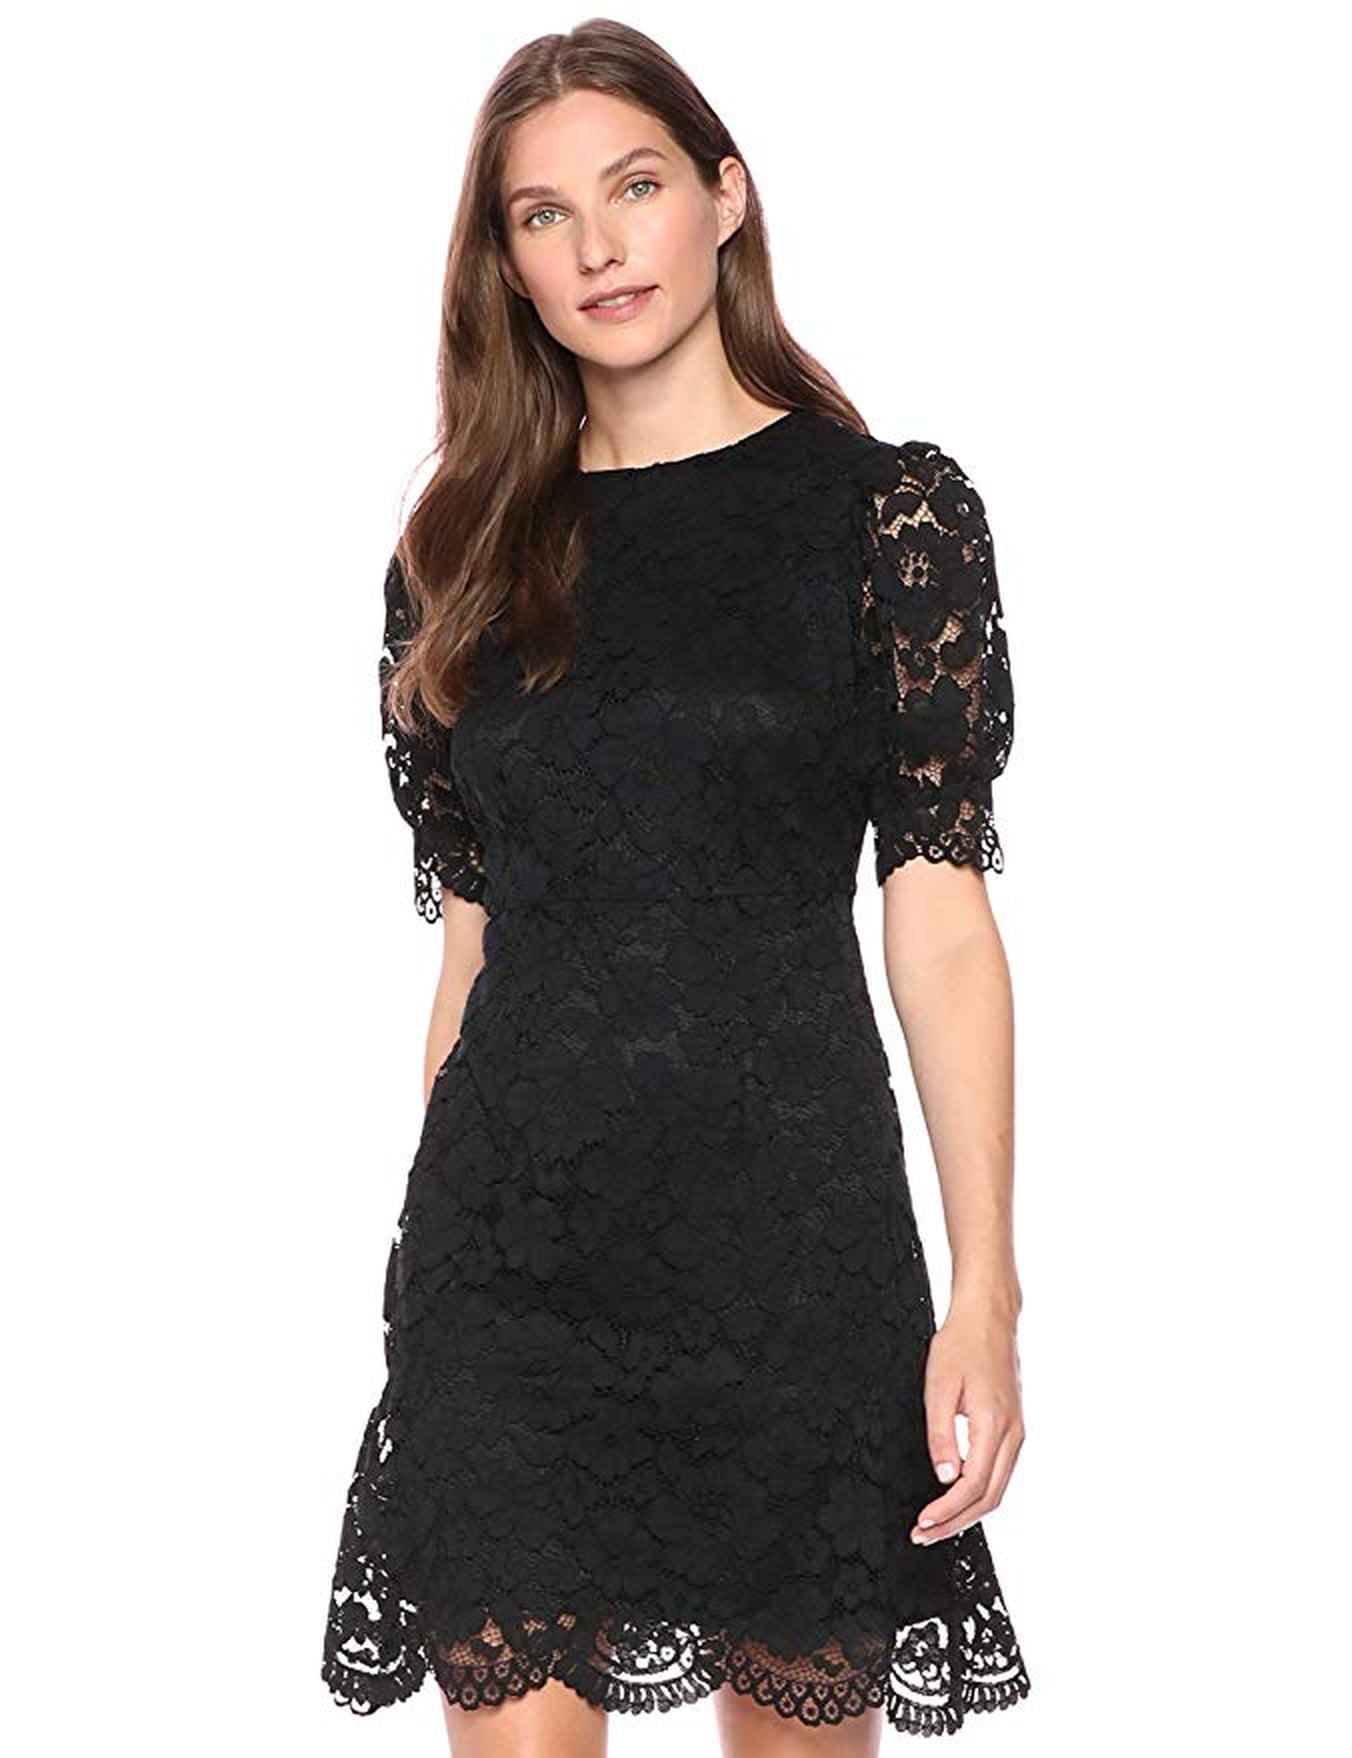 These Holiday Dresses Are All Under $100 and on Amazon | POPSUGAR Fashion